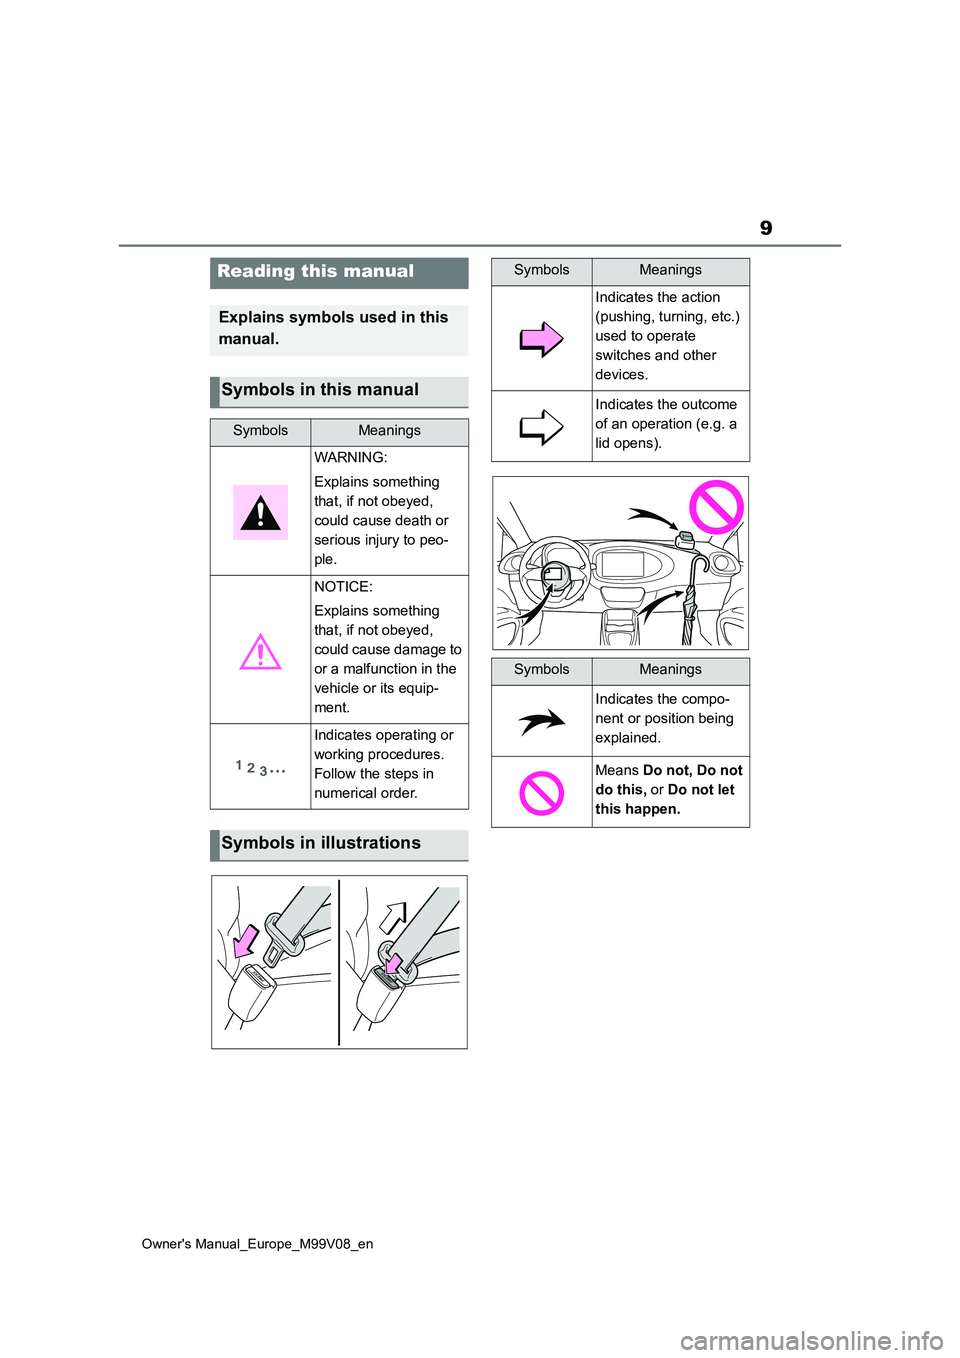 TOYOTA AYGO X 2022  Owners Manual (in English) 9
Owner's Manual_Europe_M99V08_en
Reading this manual
Explains symbols used in this  
manual.
Symbols in this manual
SymbolsMeanings
WARNING: 
Explains something  
that, if not obeyed, 
could caus